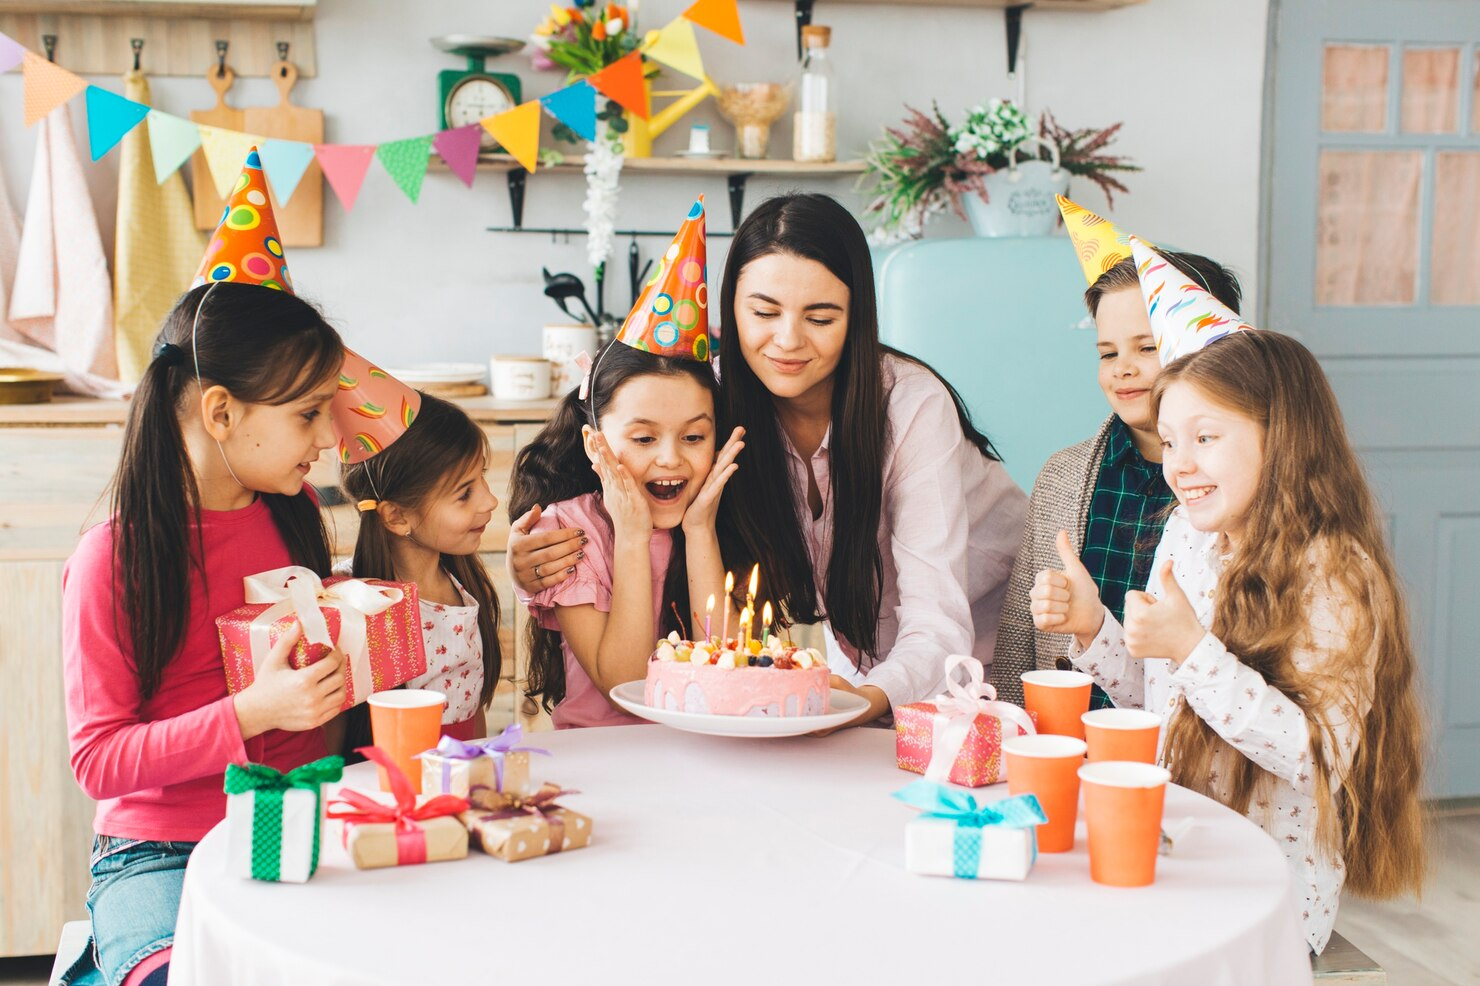 A young girl celebrating birthday with her mother and friends.